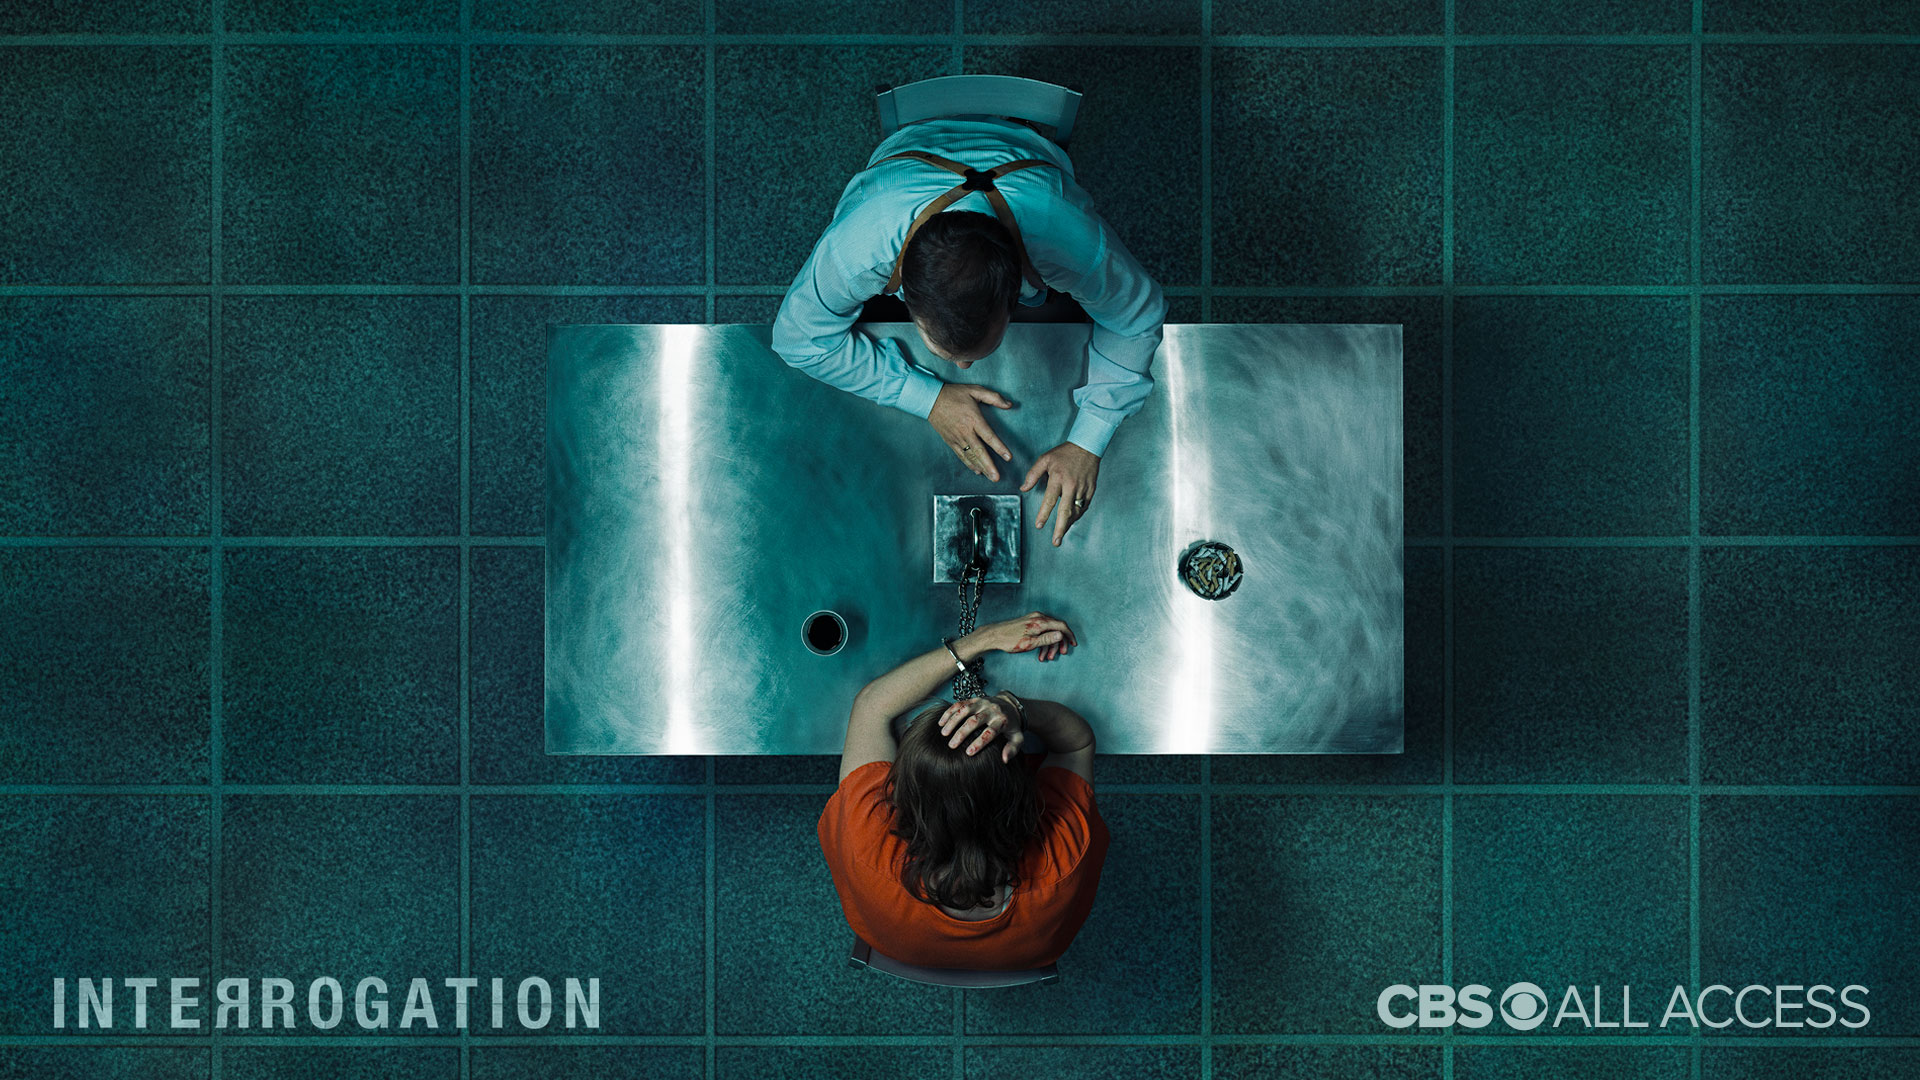 Stream Interrogation when all episodes are released on Thursday, Feb. 6 exclusively on CBS All Access.